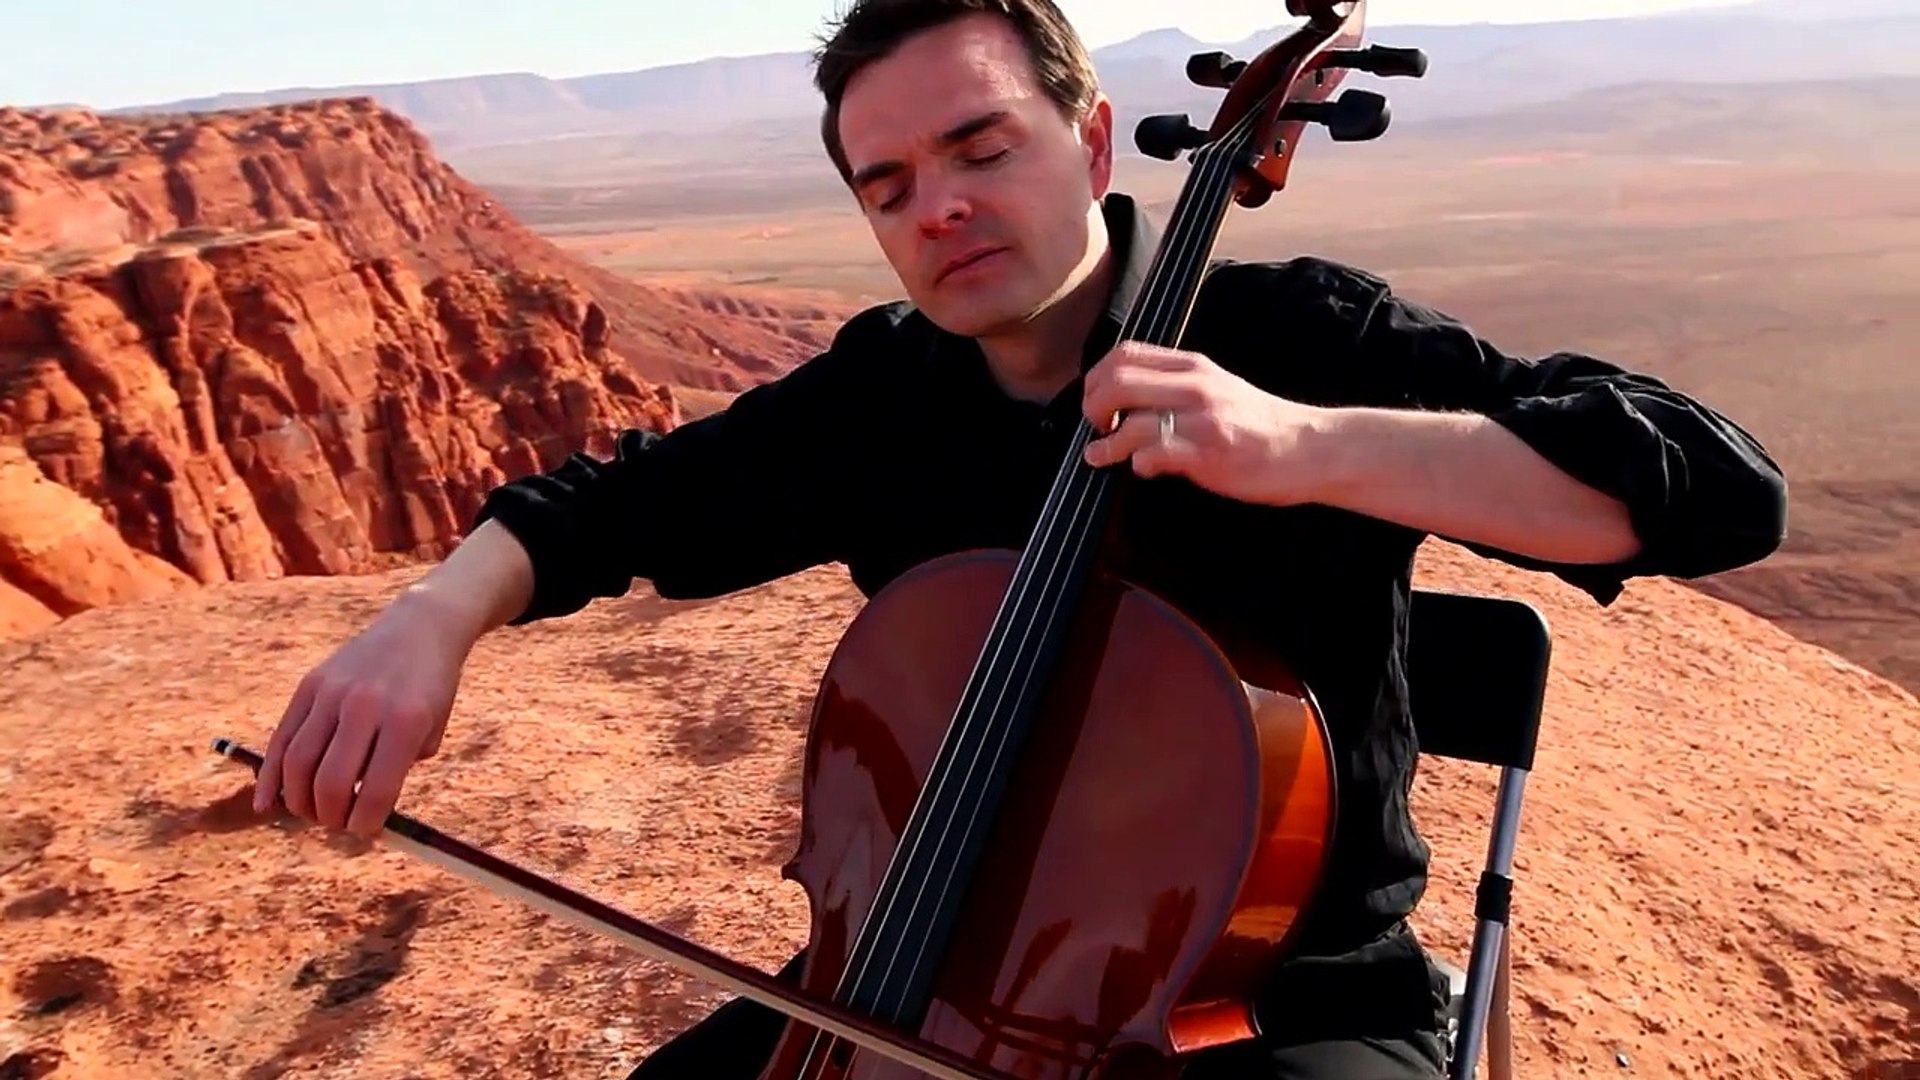 Coldplay - Paradise (Peponi) African Style (ft. guest artist, Alex Boye) - ThePianoGuys